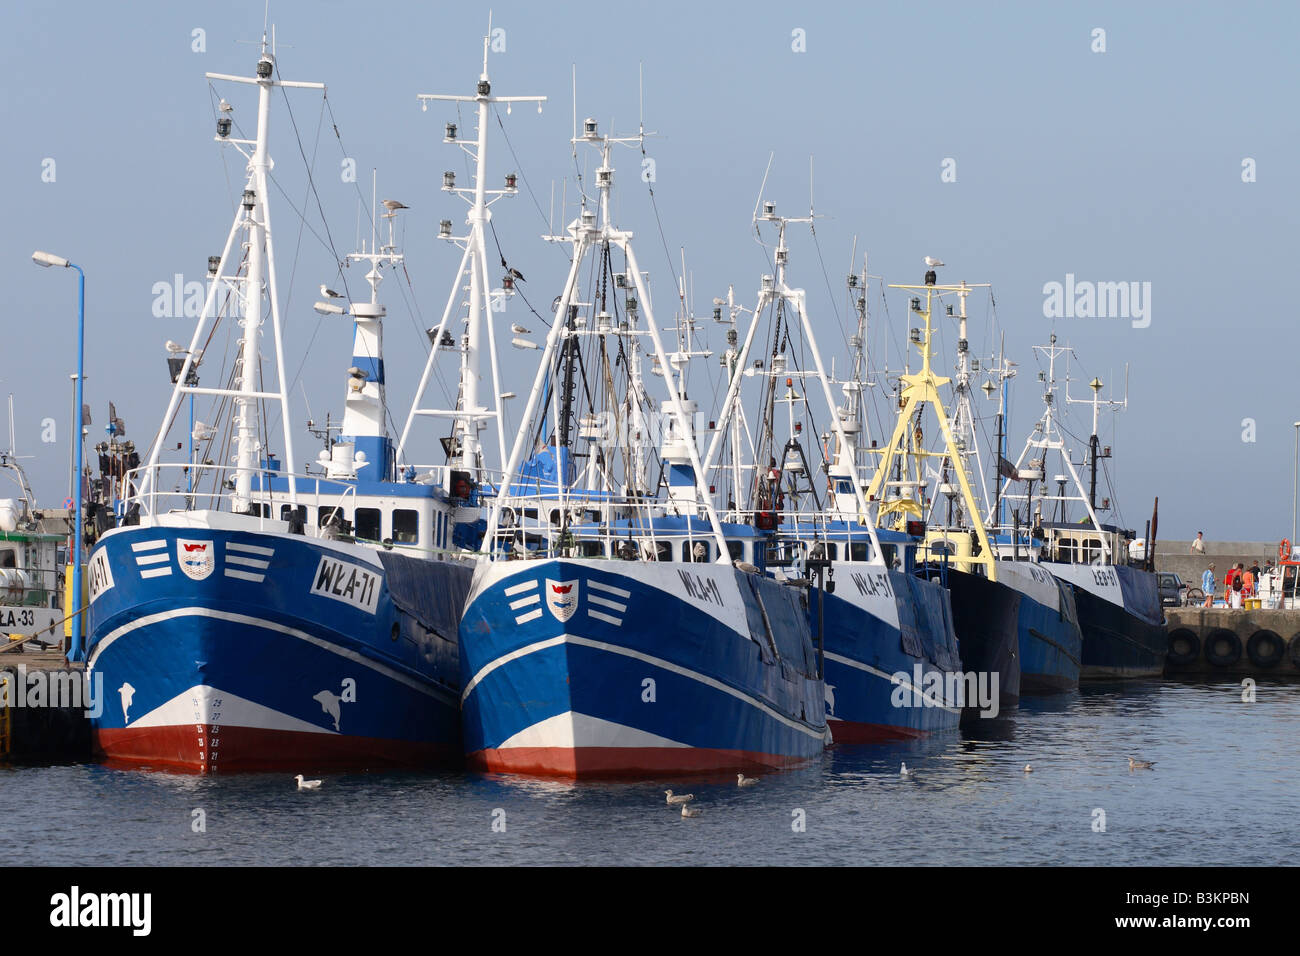 Wladyslawowo Poland busy port harbour scene with fishing vessel boats moored at this Baltic Sea town Stock Photo